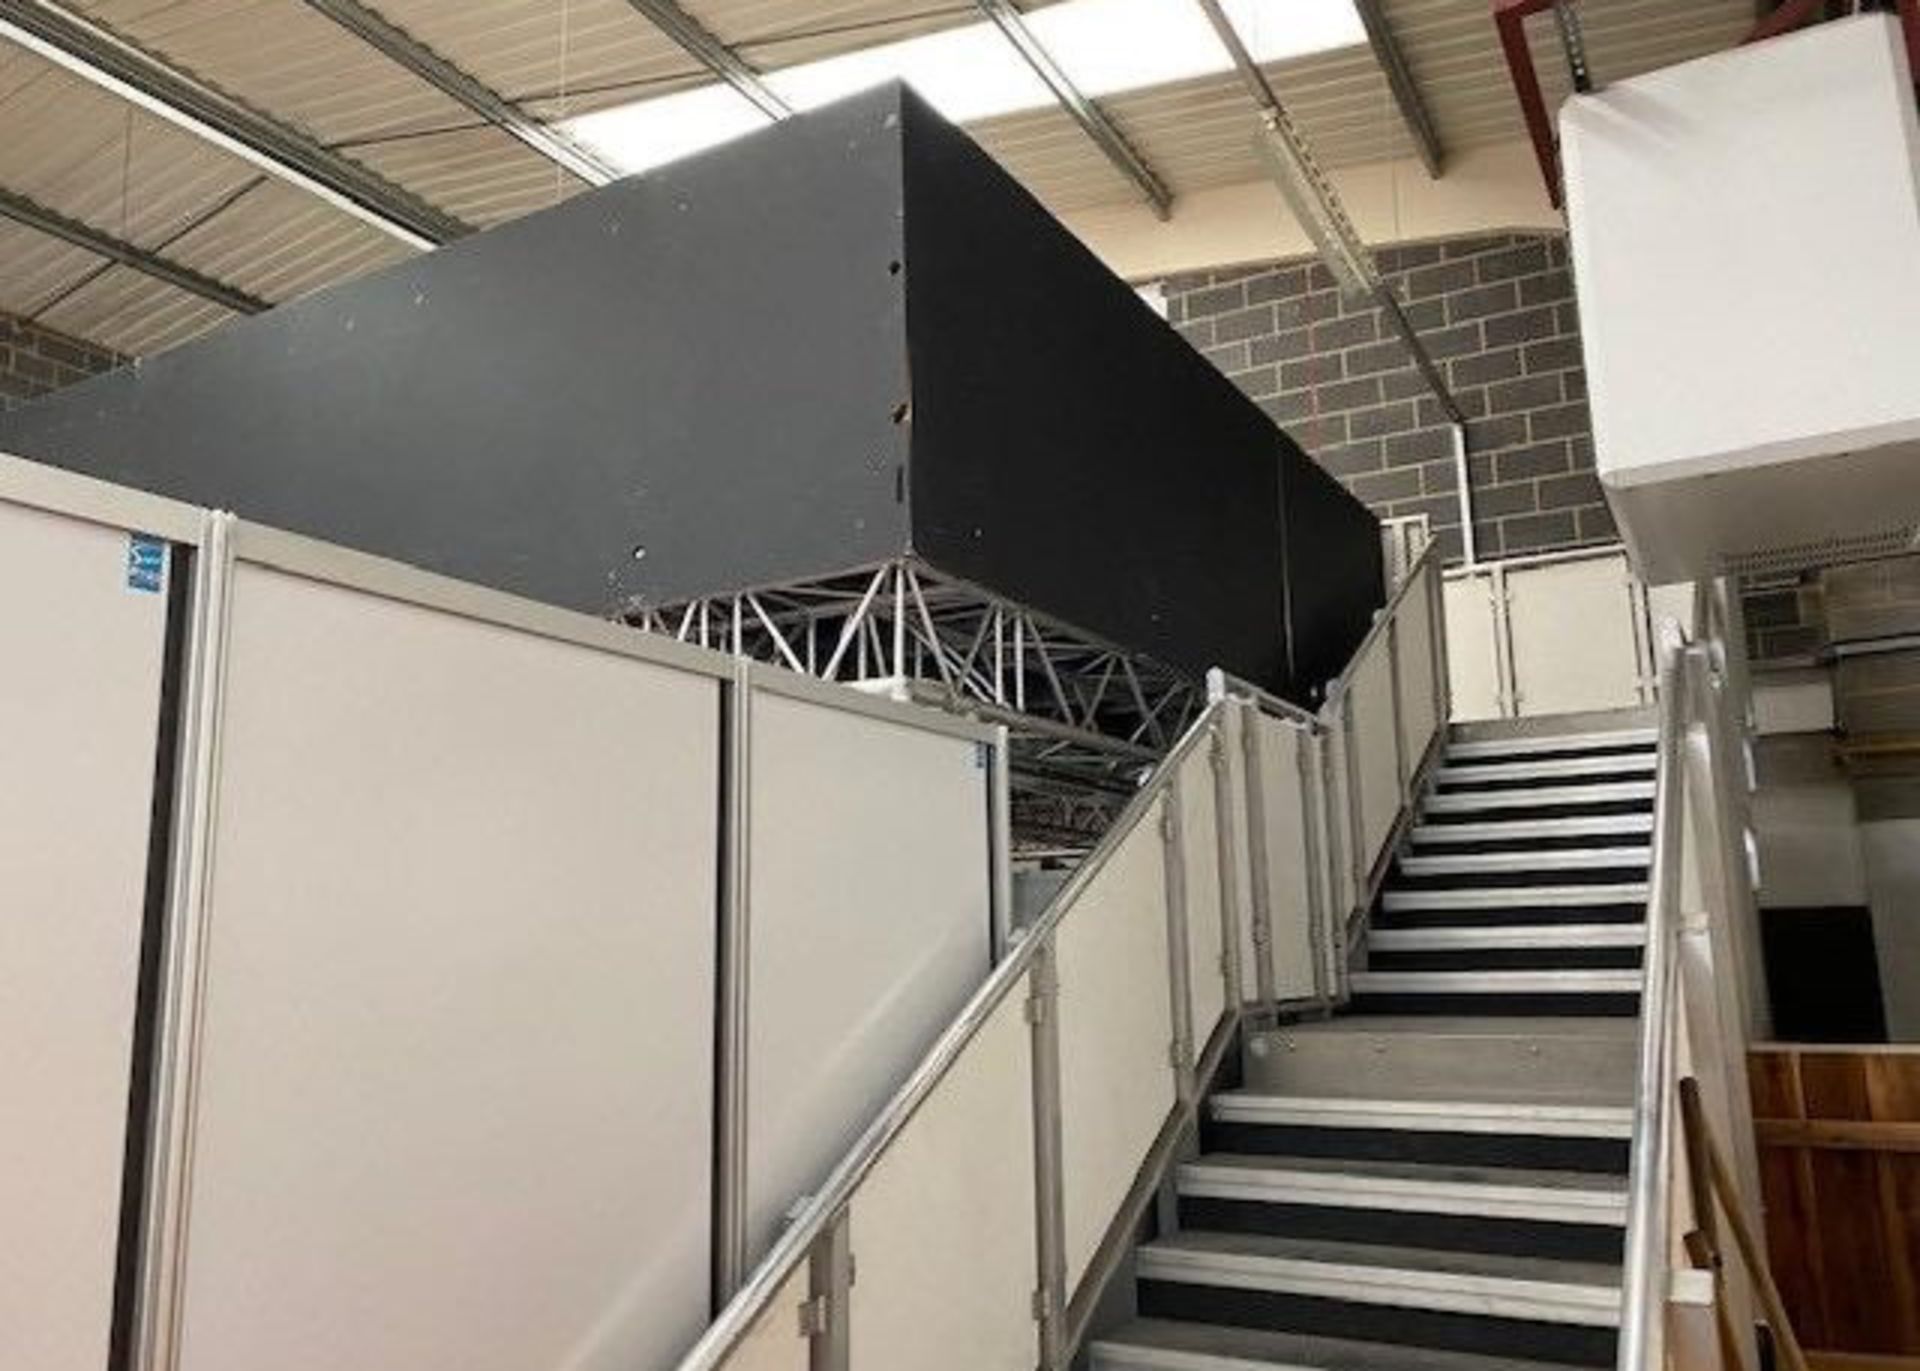 1 x 8m x 10m Truss Mezzanine with Staircase, Solid Floor And Ballustrade- CL548 - Location: Near - Image 9 of 10